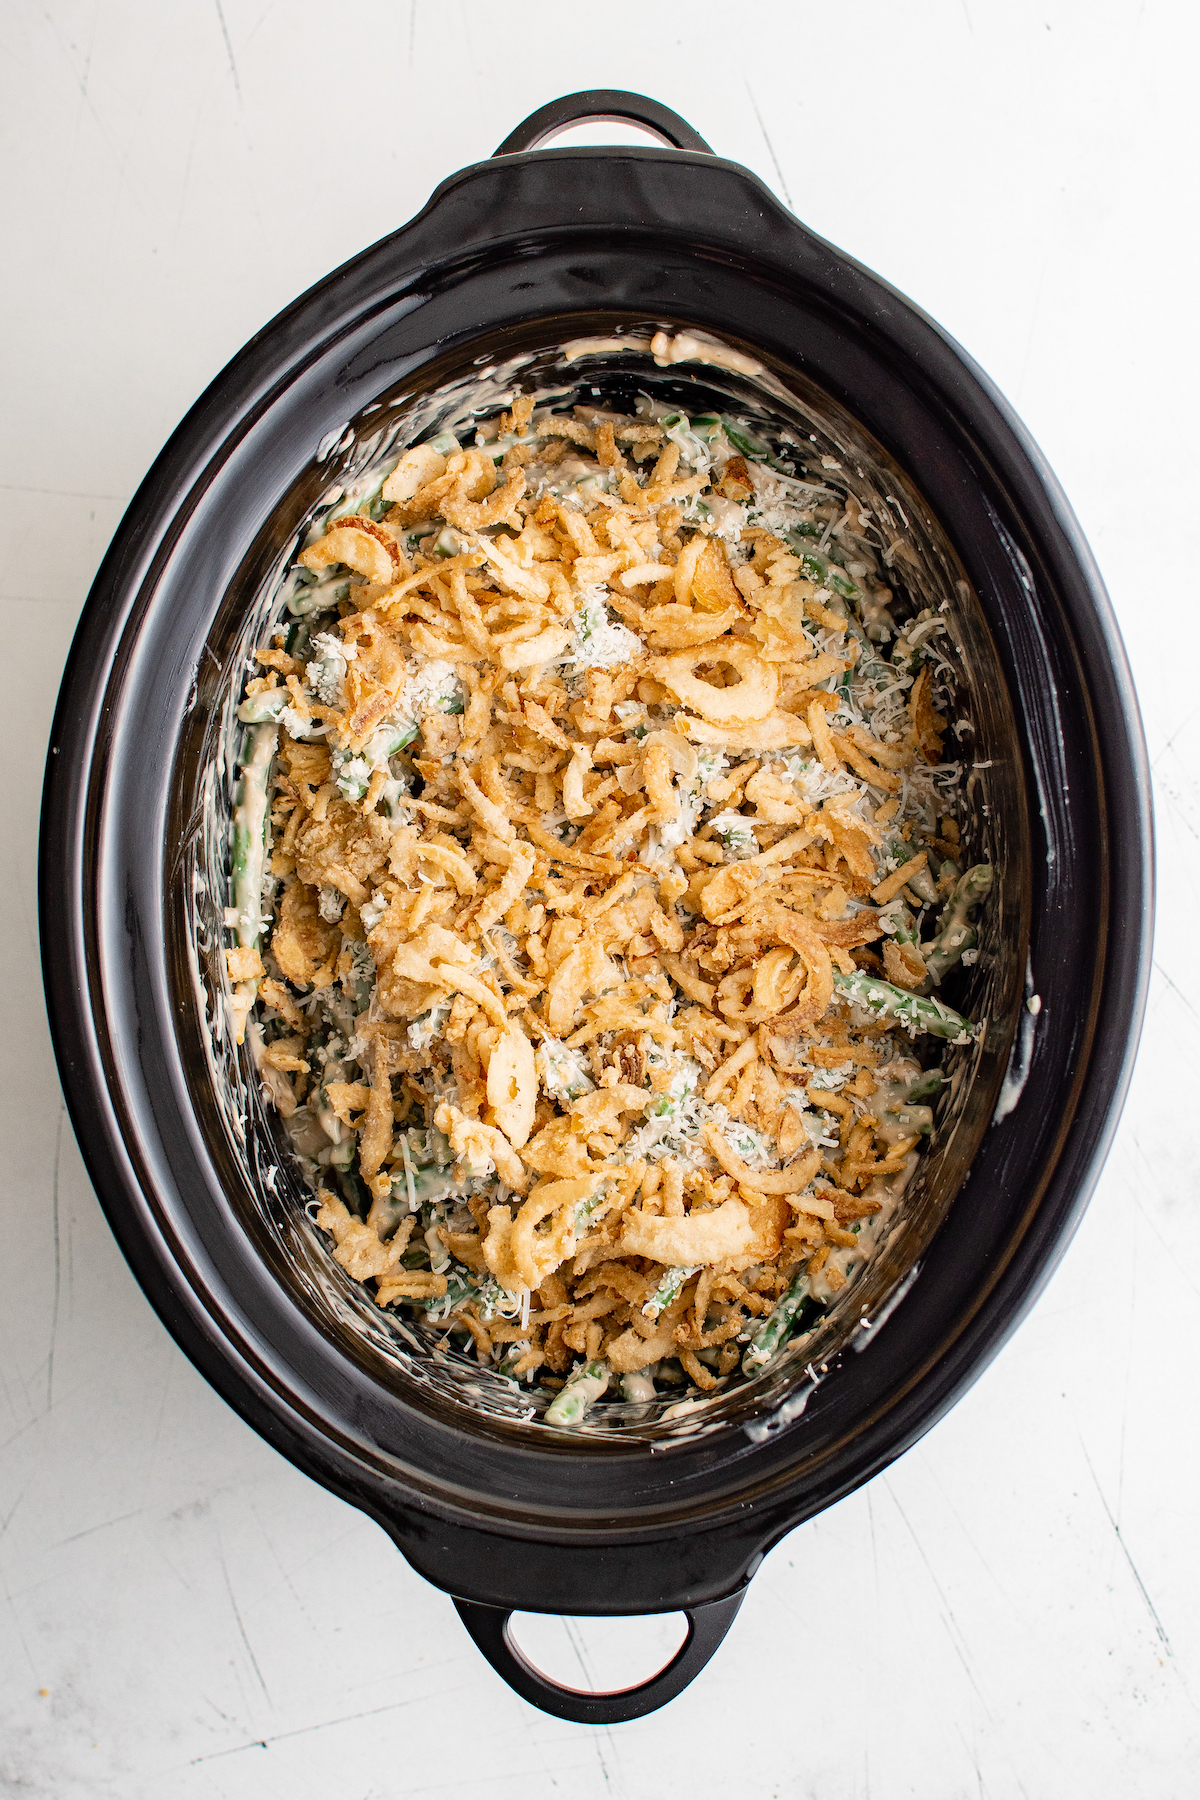 An un-cooked casserole topped with fried onions in a crock pot.